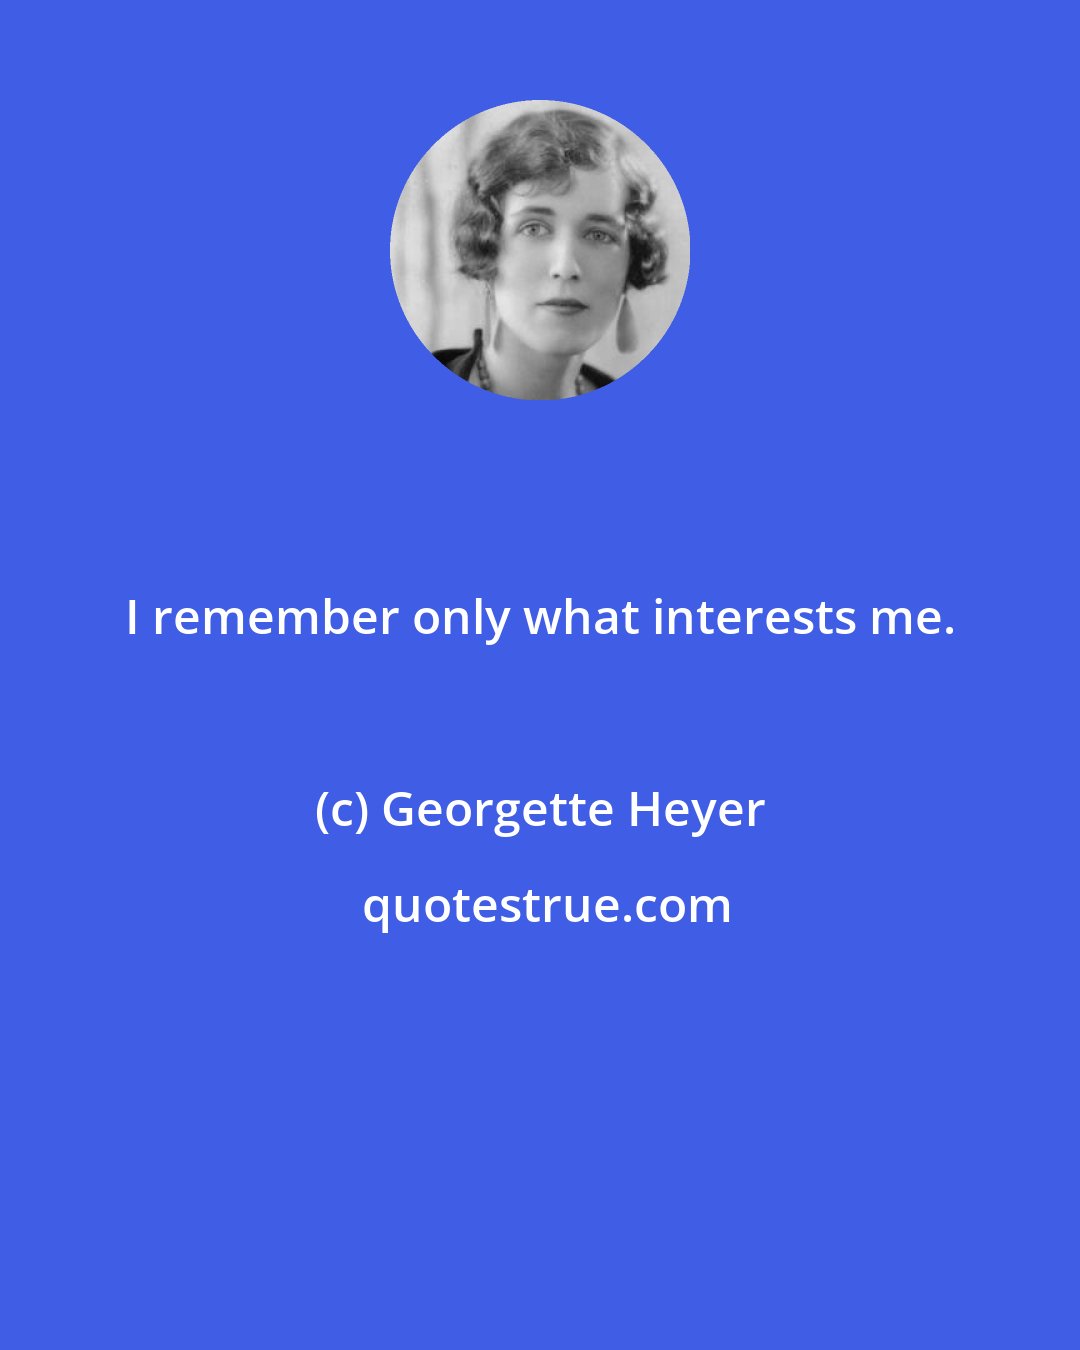 Georgette Heyer: I remember only what interests me.